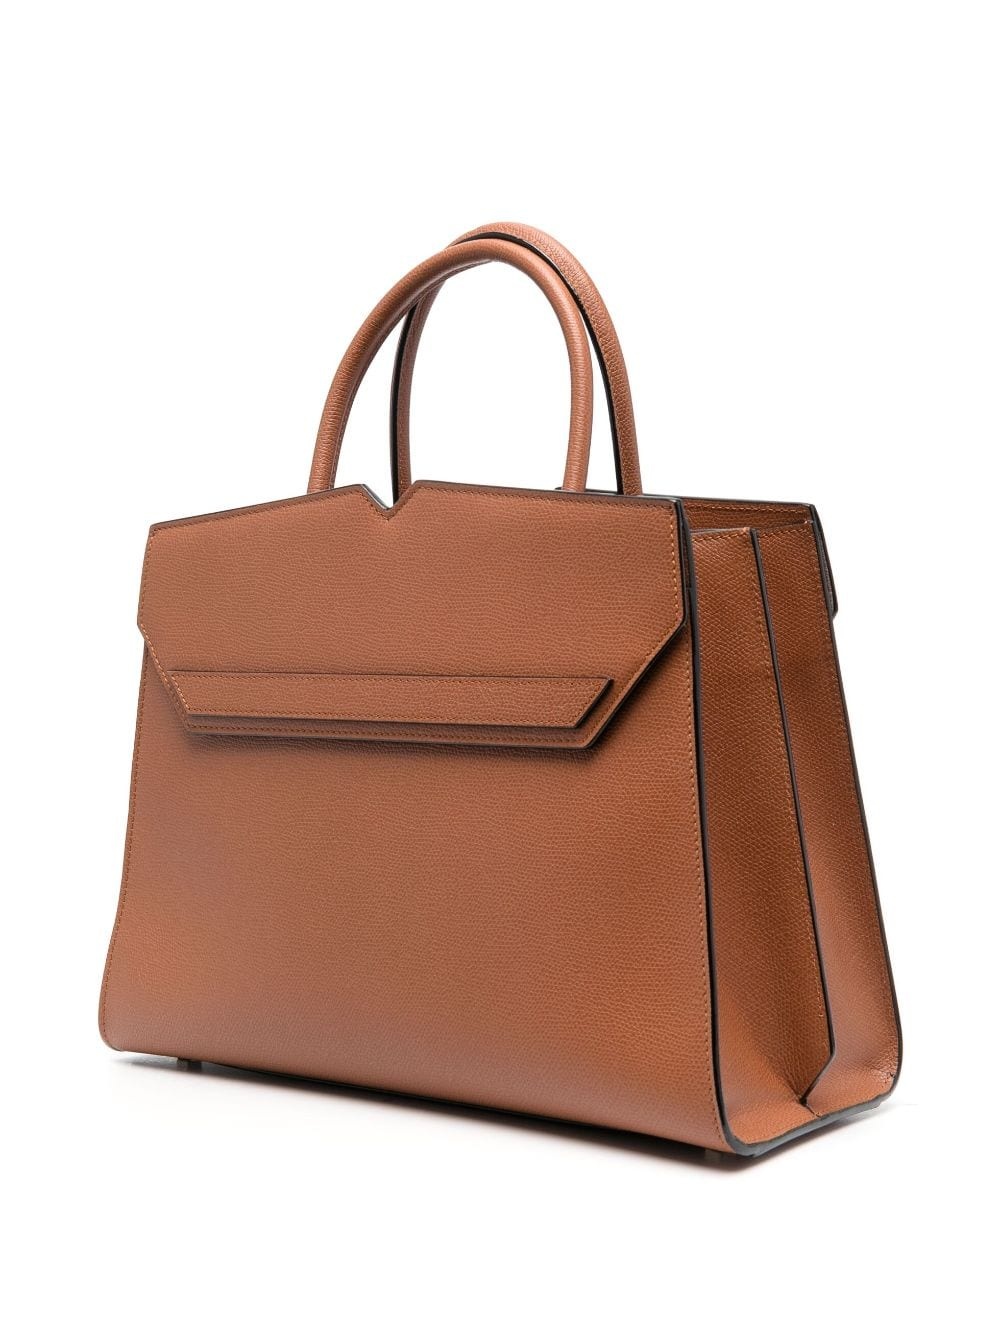 Duetto leather tote bag - 3